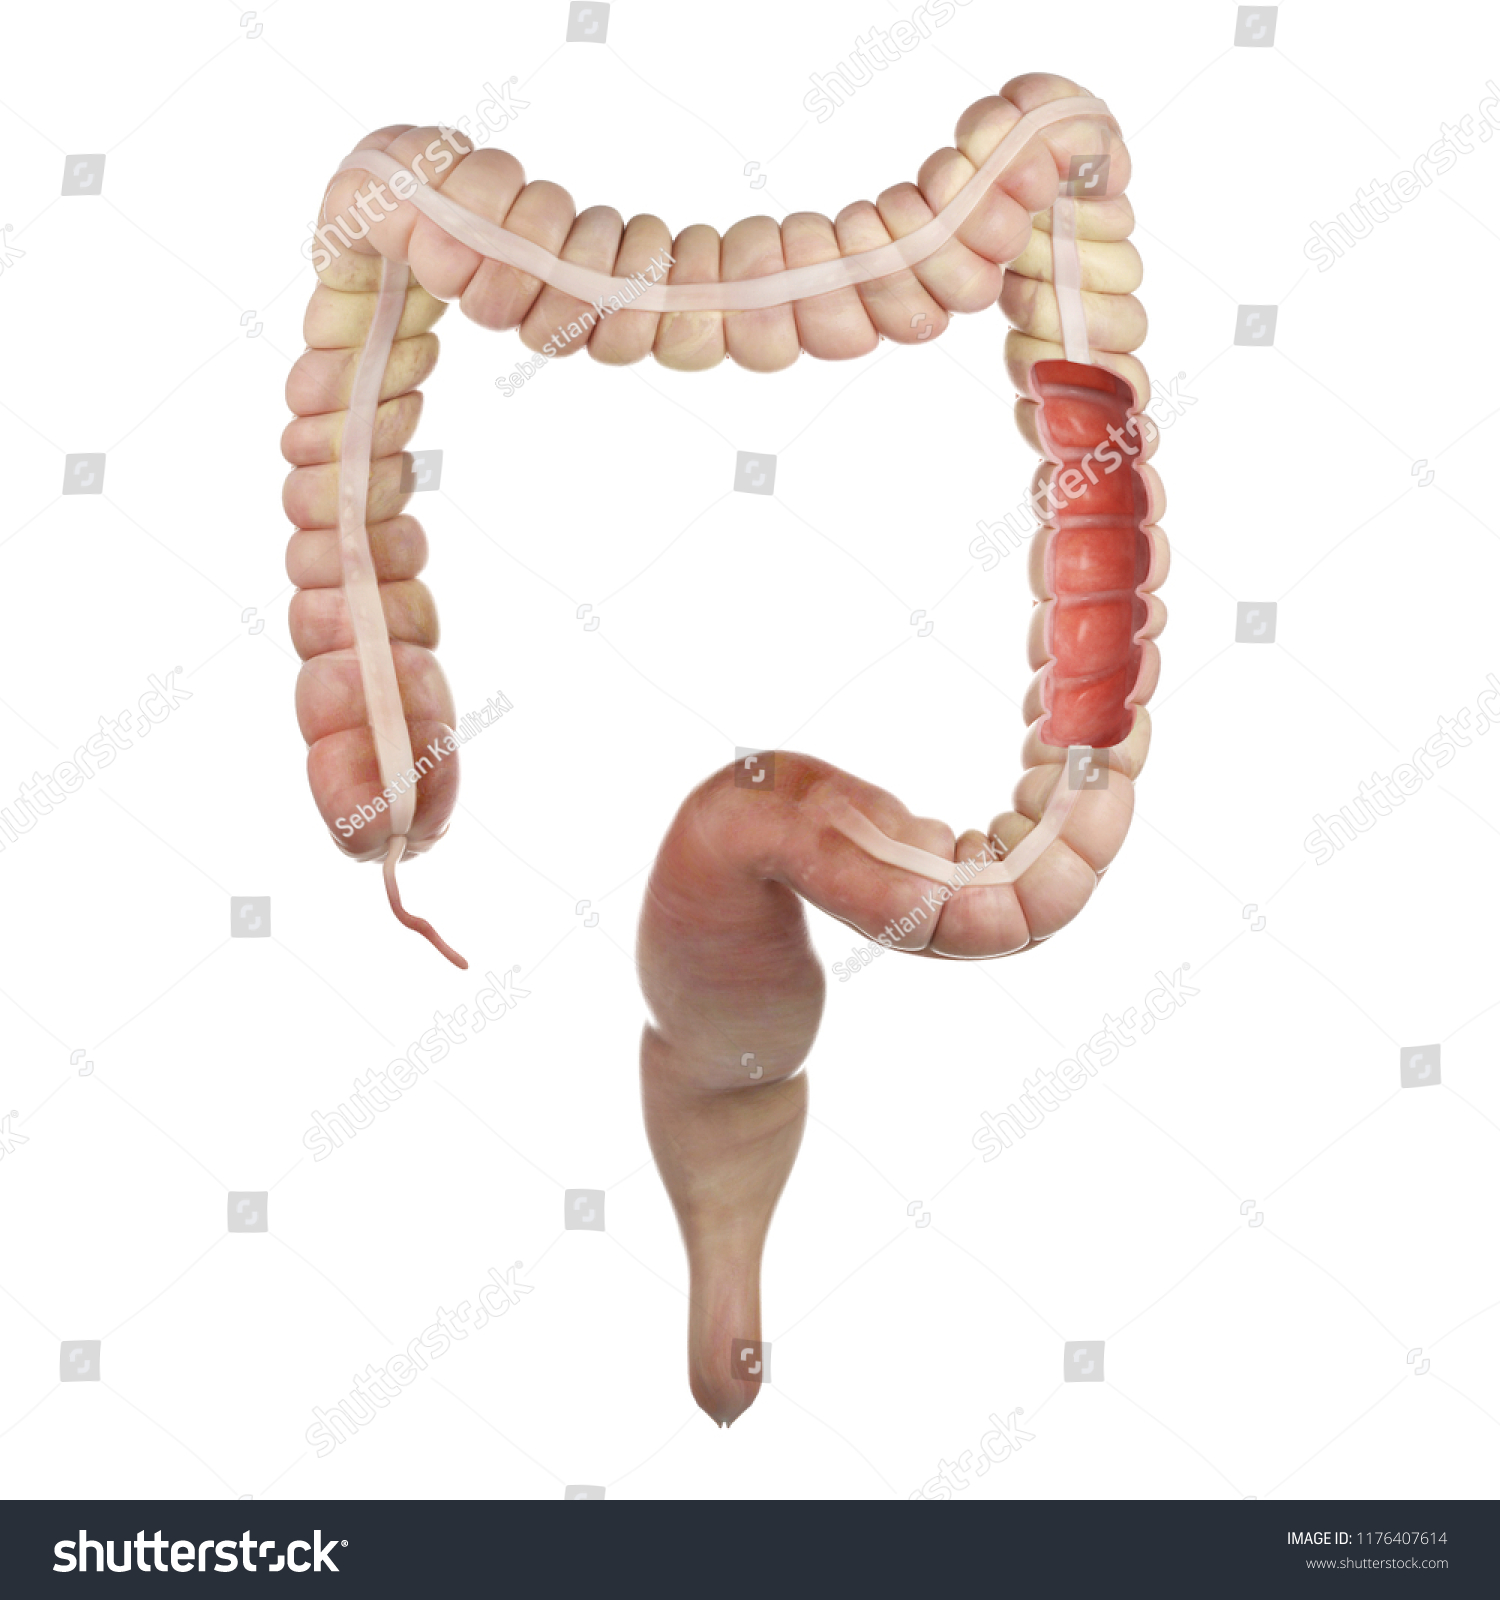 3d rendered medically accurate illustration of the interior colon #1176407614